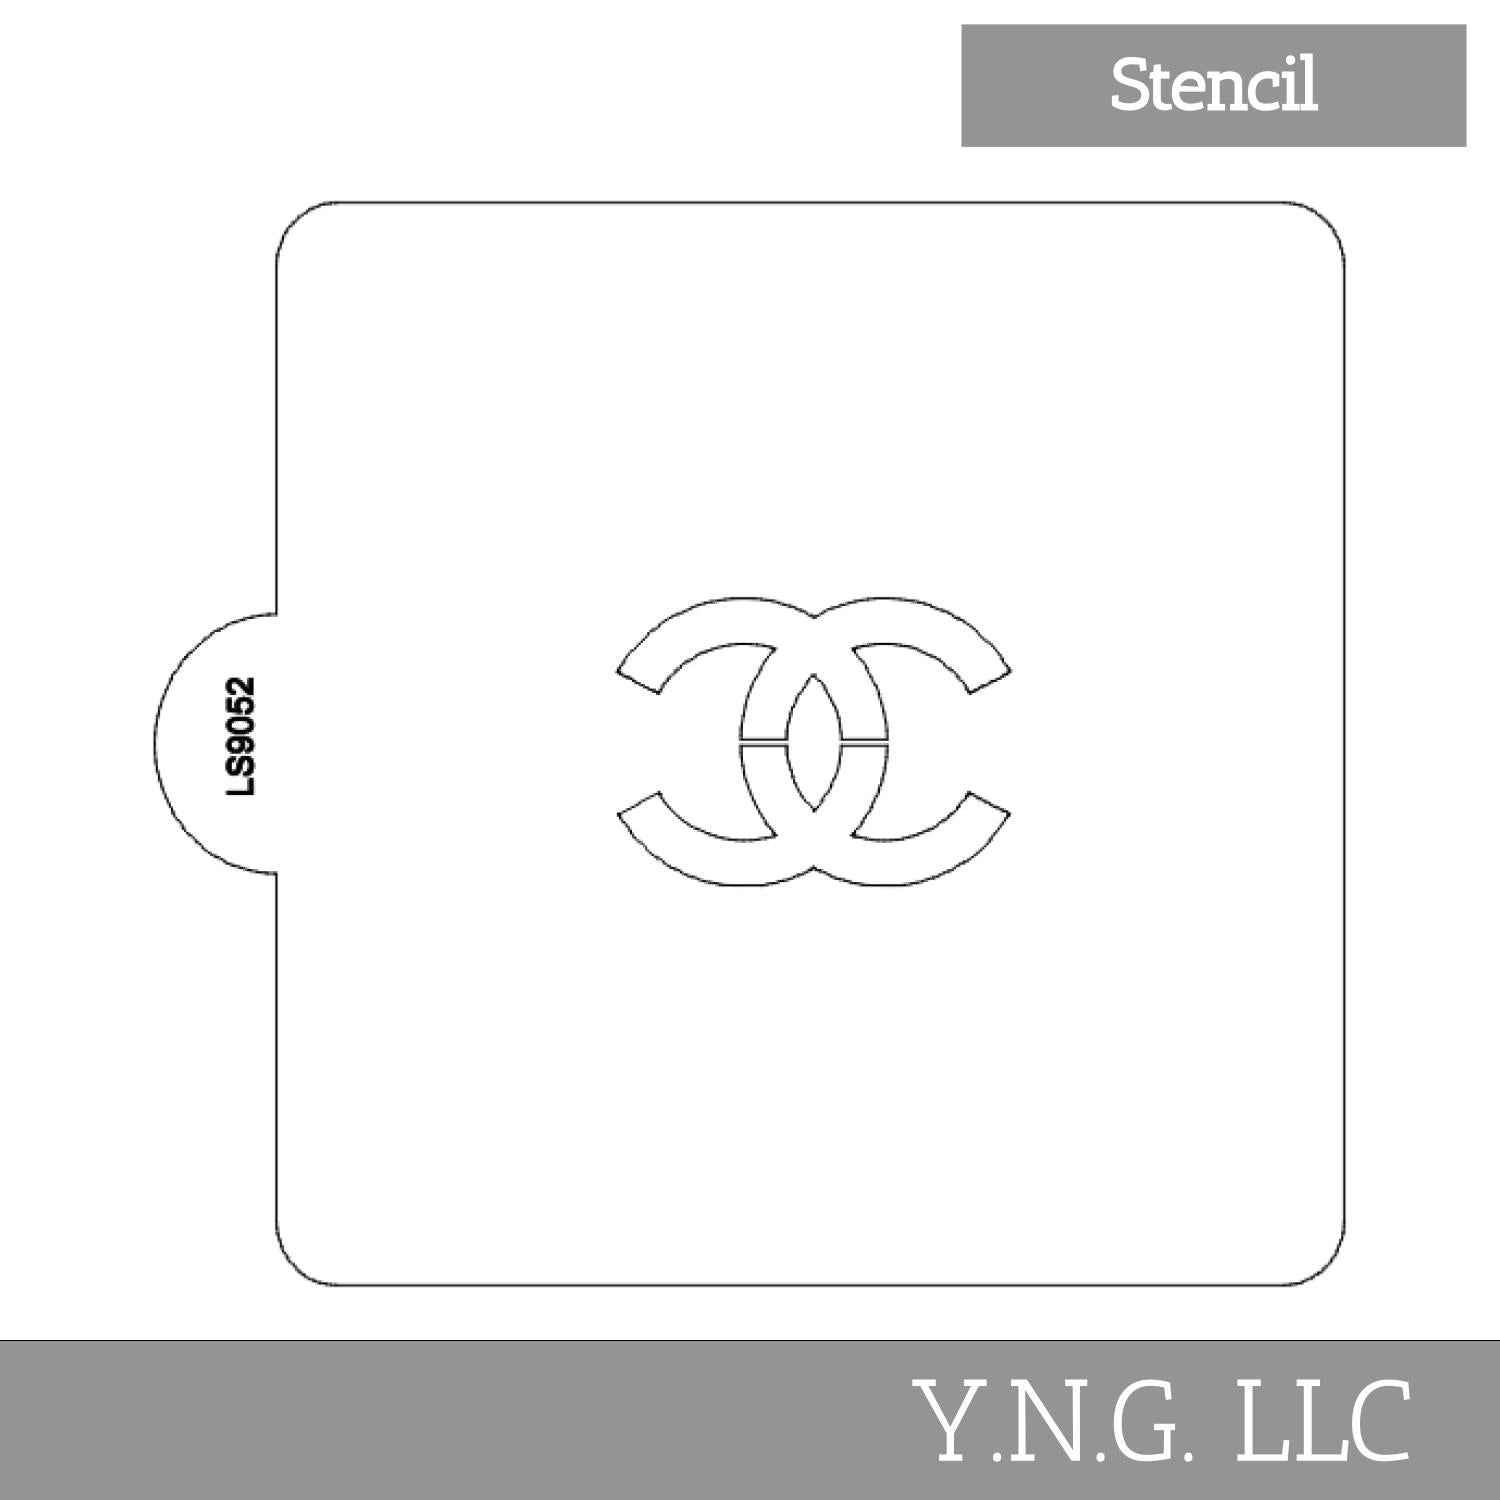 Chanel Symbol Design Stencil for Cookies or Cakes USA Made LS9052